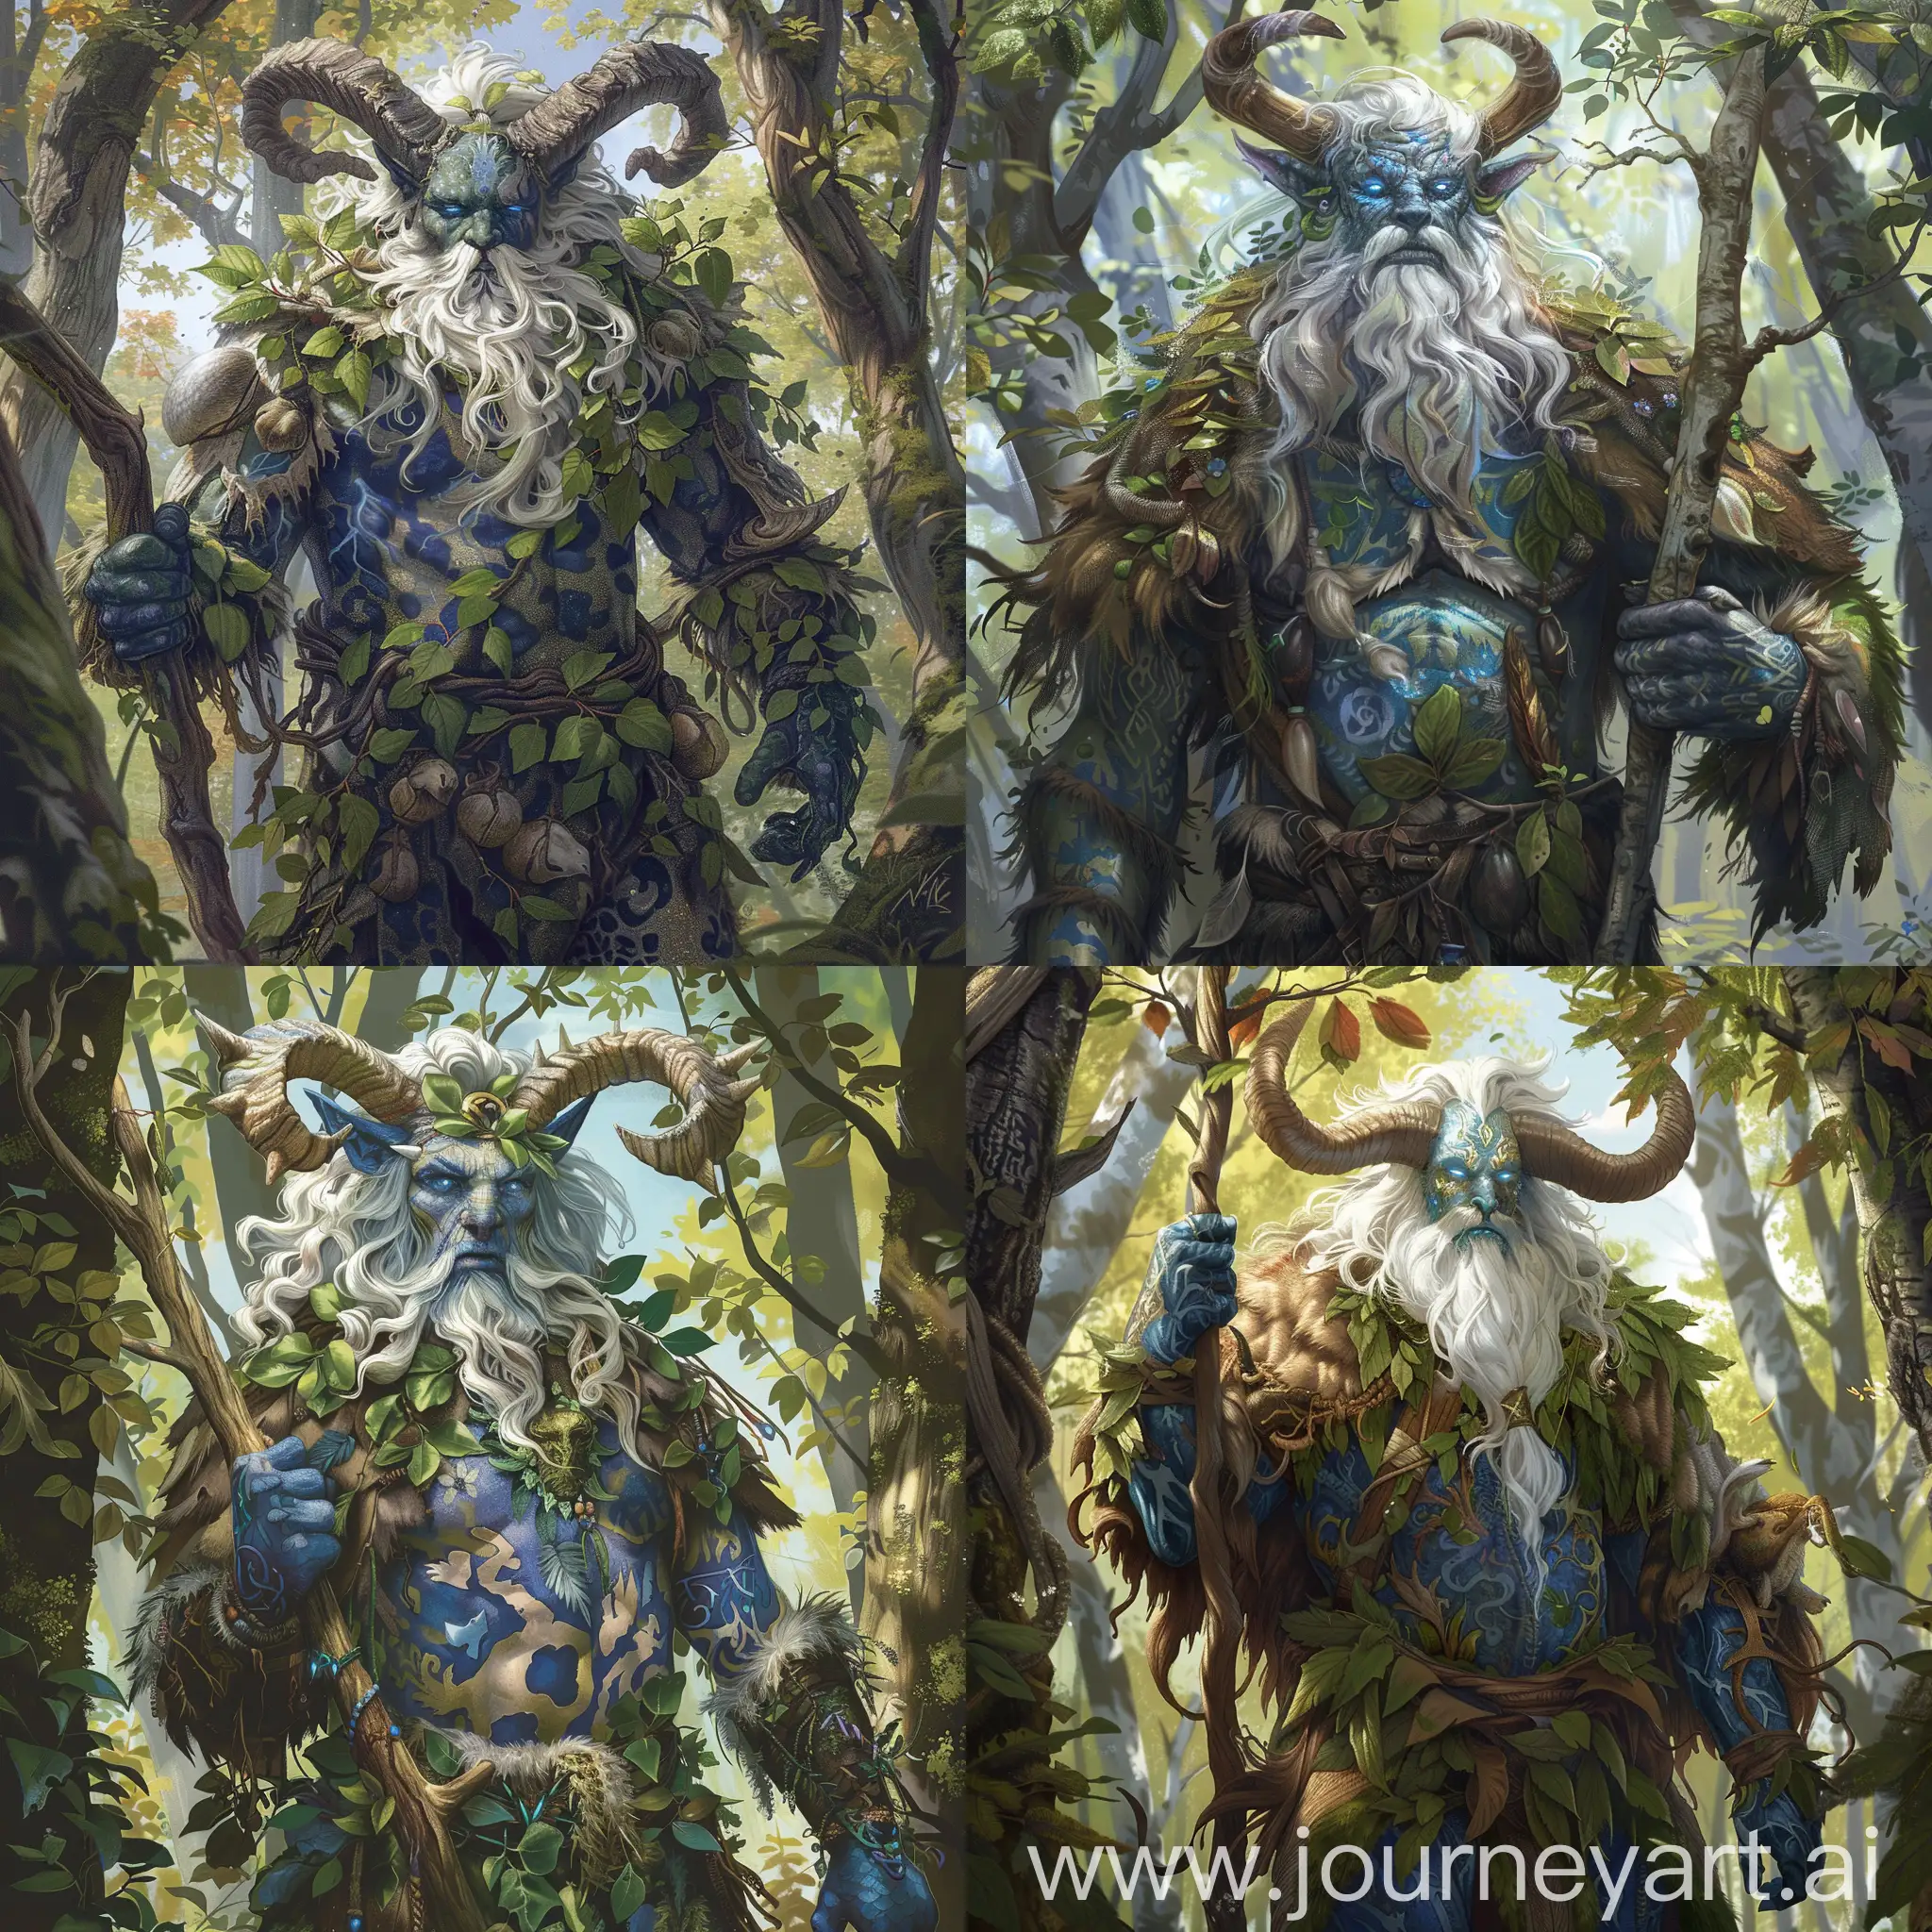 A captivating NPC portrait : Amidst the heart of the forest, a towering figure emerges from between the trees. The Firbolg Wanderer, a peaceful colossus, stands over seven feet tall. His thick, blueish skin is adorned with patterns resembling flora, reflecting the surrounding nature. Long white hair curls around his majestic horns, while piercing blue eyes observe the world with benevolent wisdom. Clad in animal skins and leaves, he carries a gnarled wooden staff, symbolizing his deep connection to nature. An aura of serenity emanates from this gentle giant, a benevolent guardian of the woods ready to defend his territory and his friends.